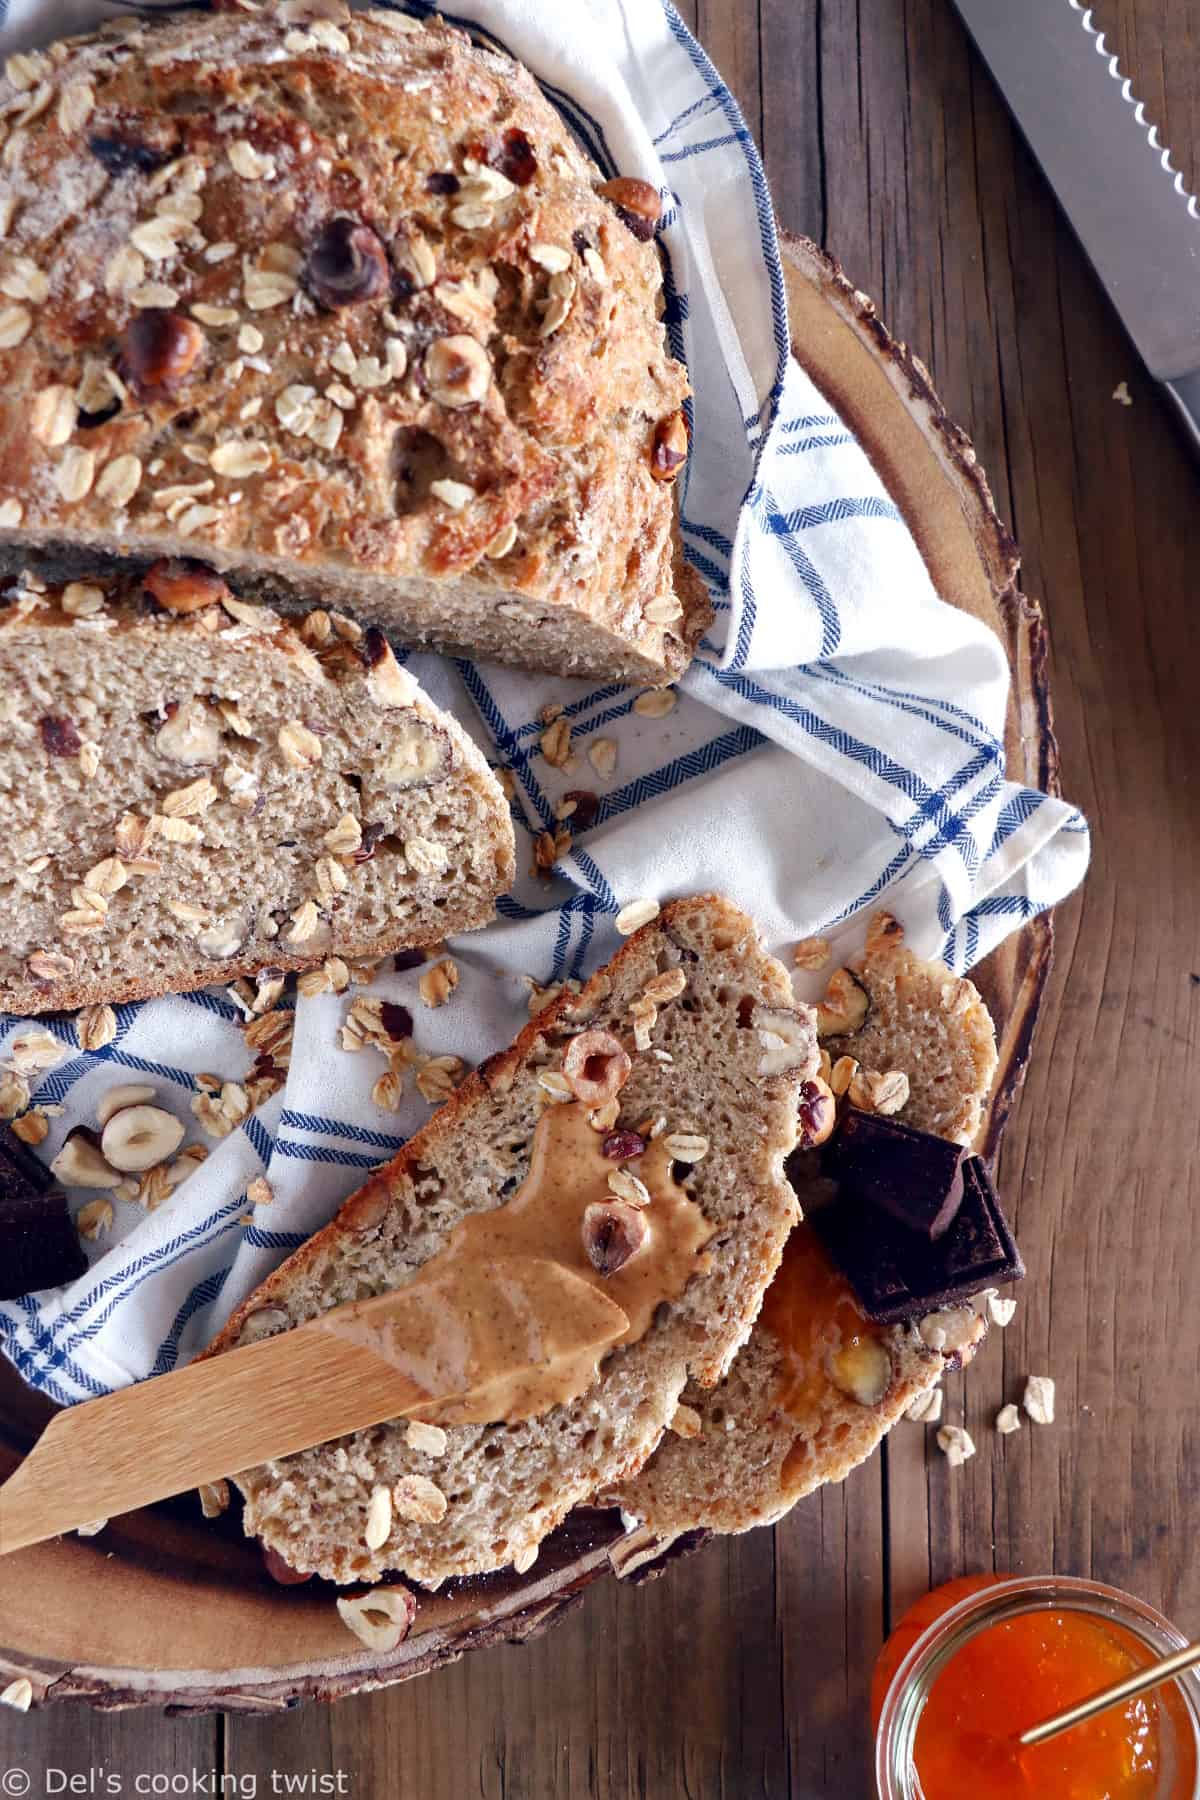 This no-knead hazelnut oat breakfast bread is a variation of the no-knead bread. With absolutely no effort, you get a perfect artisan bread every time you make it.